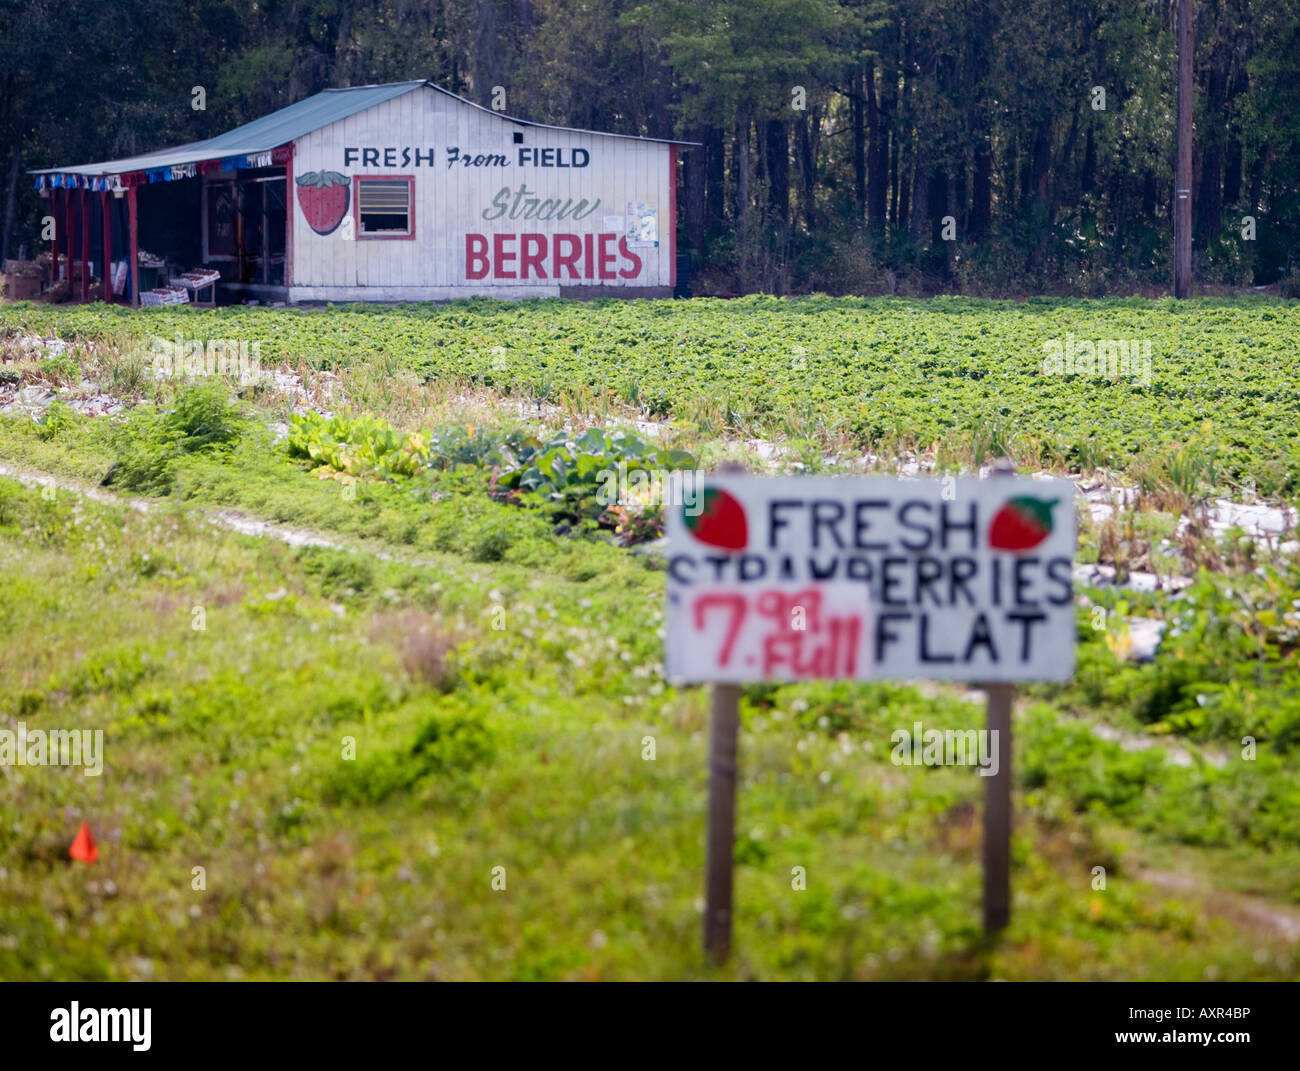 Roadside stand selling strawberries Stock Photo